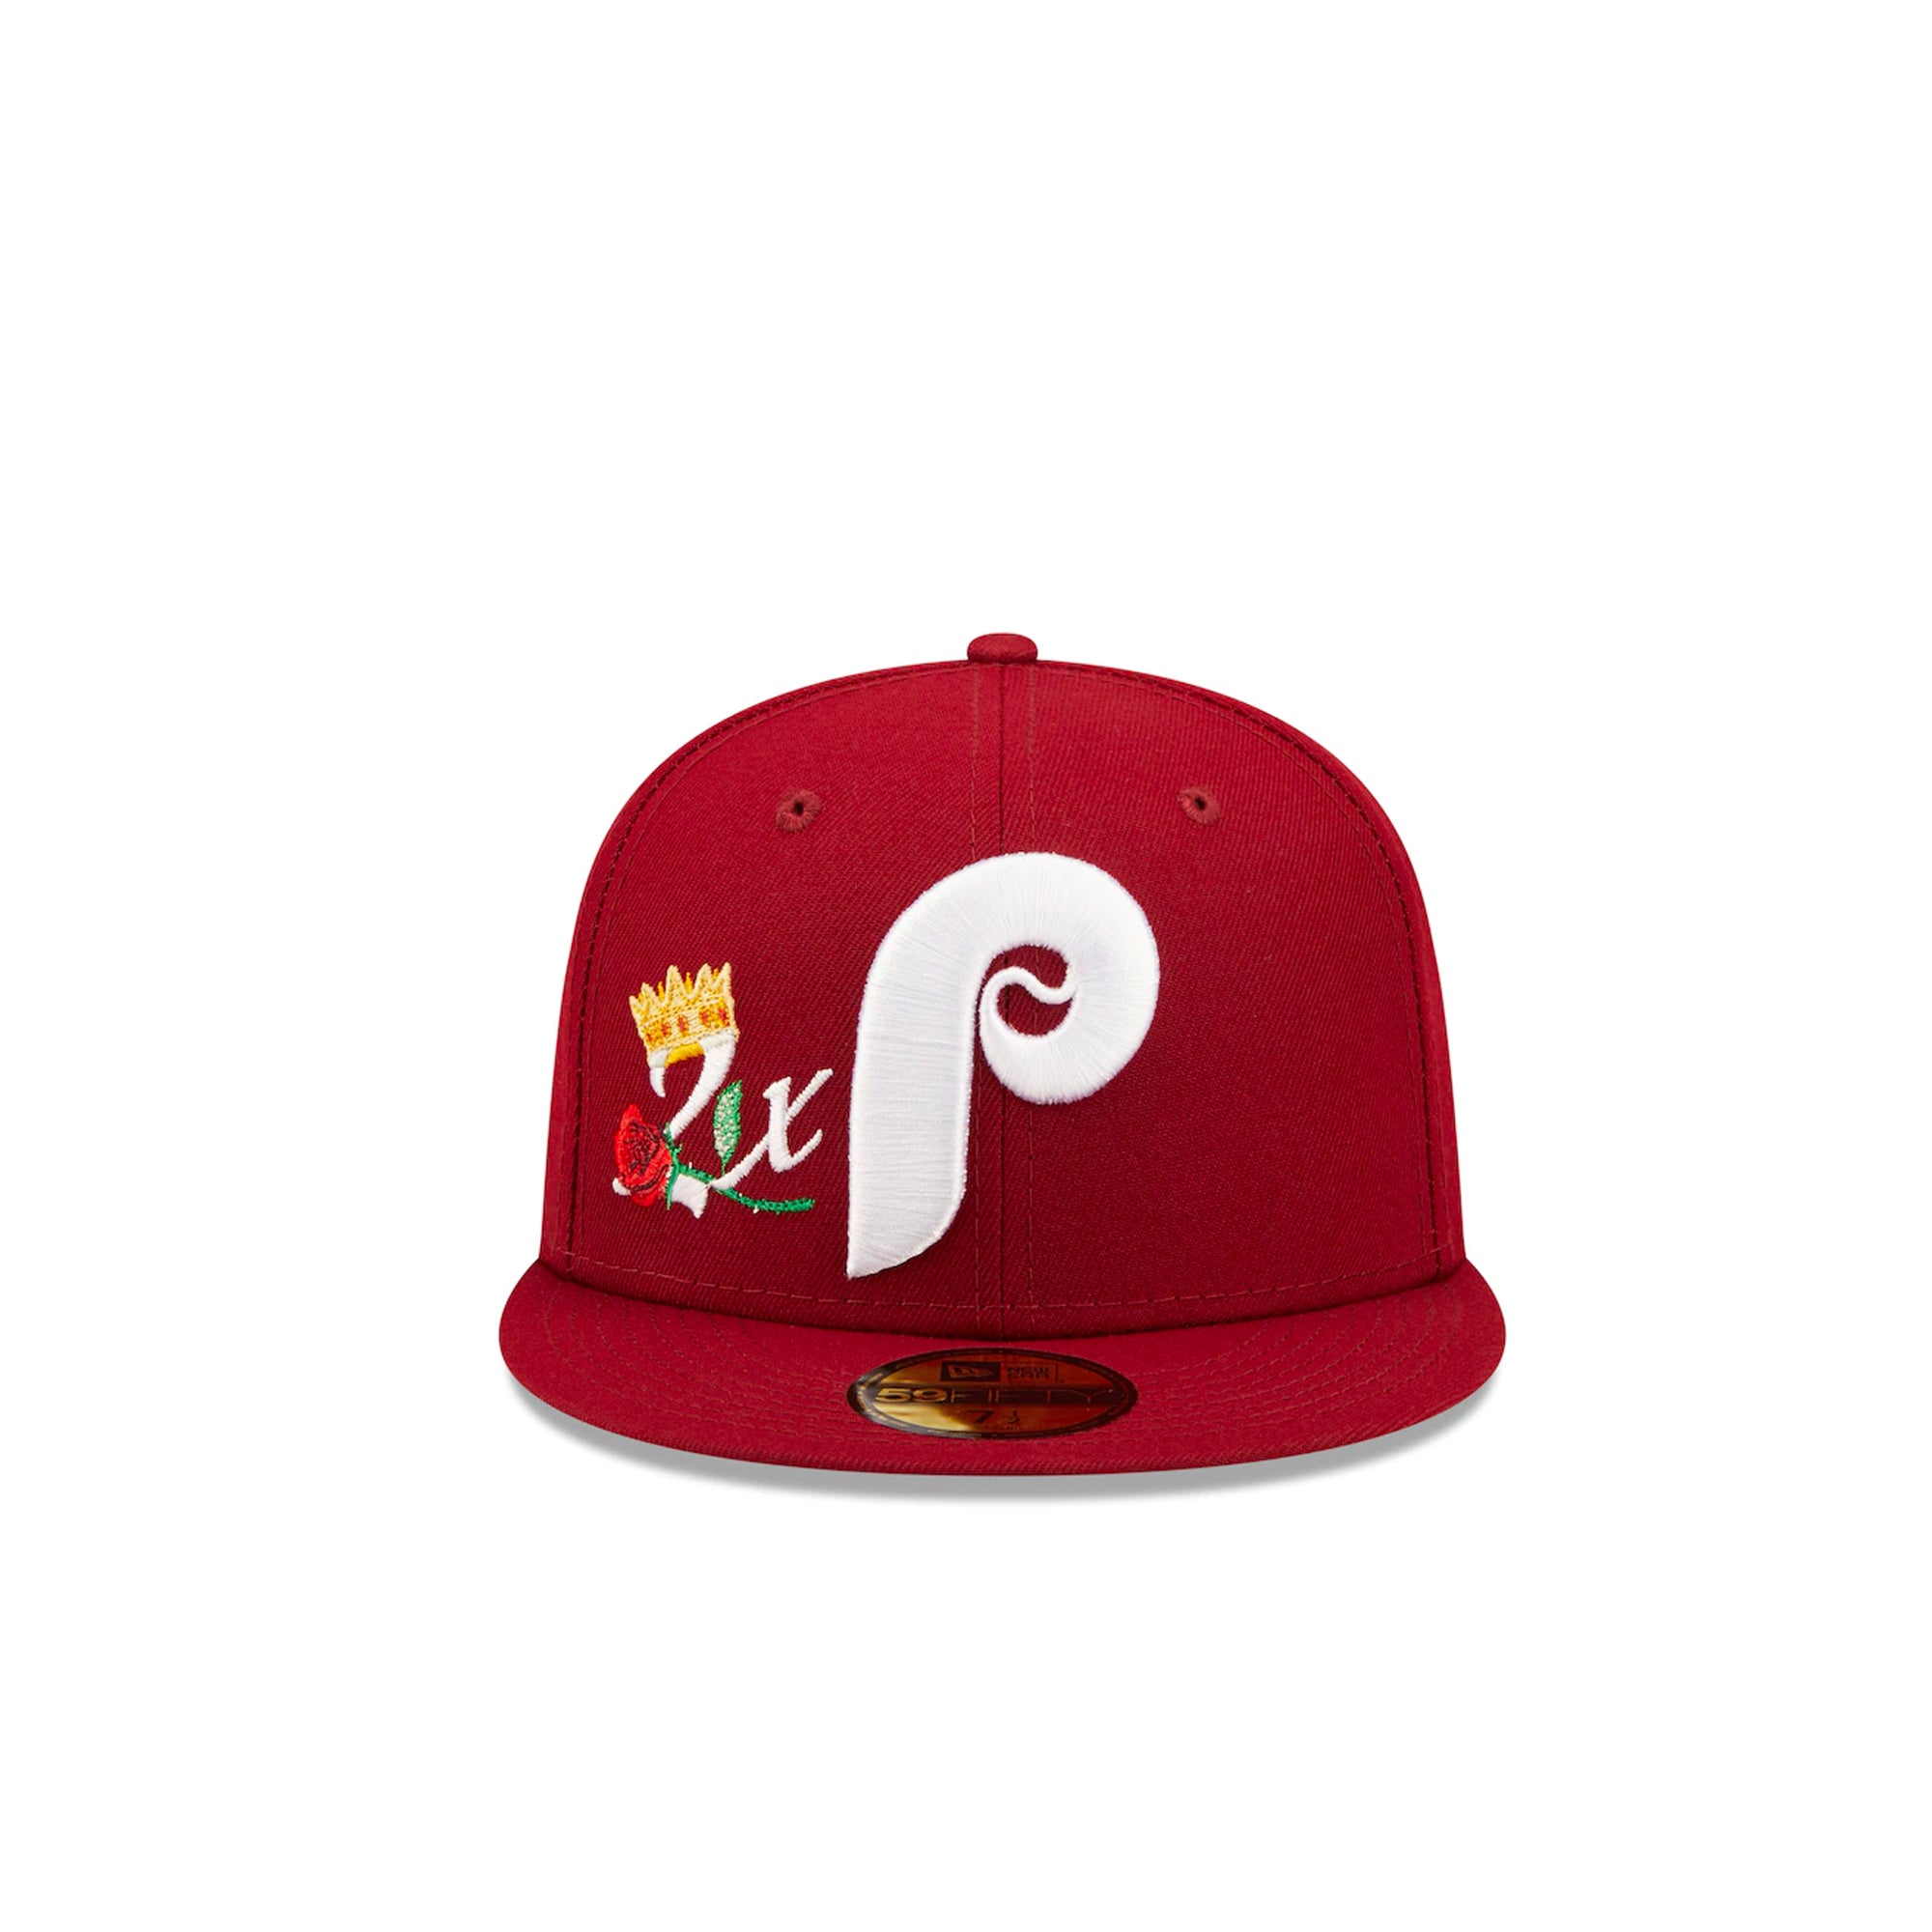 New Era Crown Champs 59FIFTY Philadelphia Phillies Fitted Hat 7-3/8